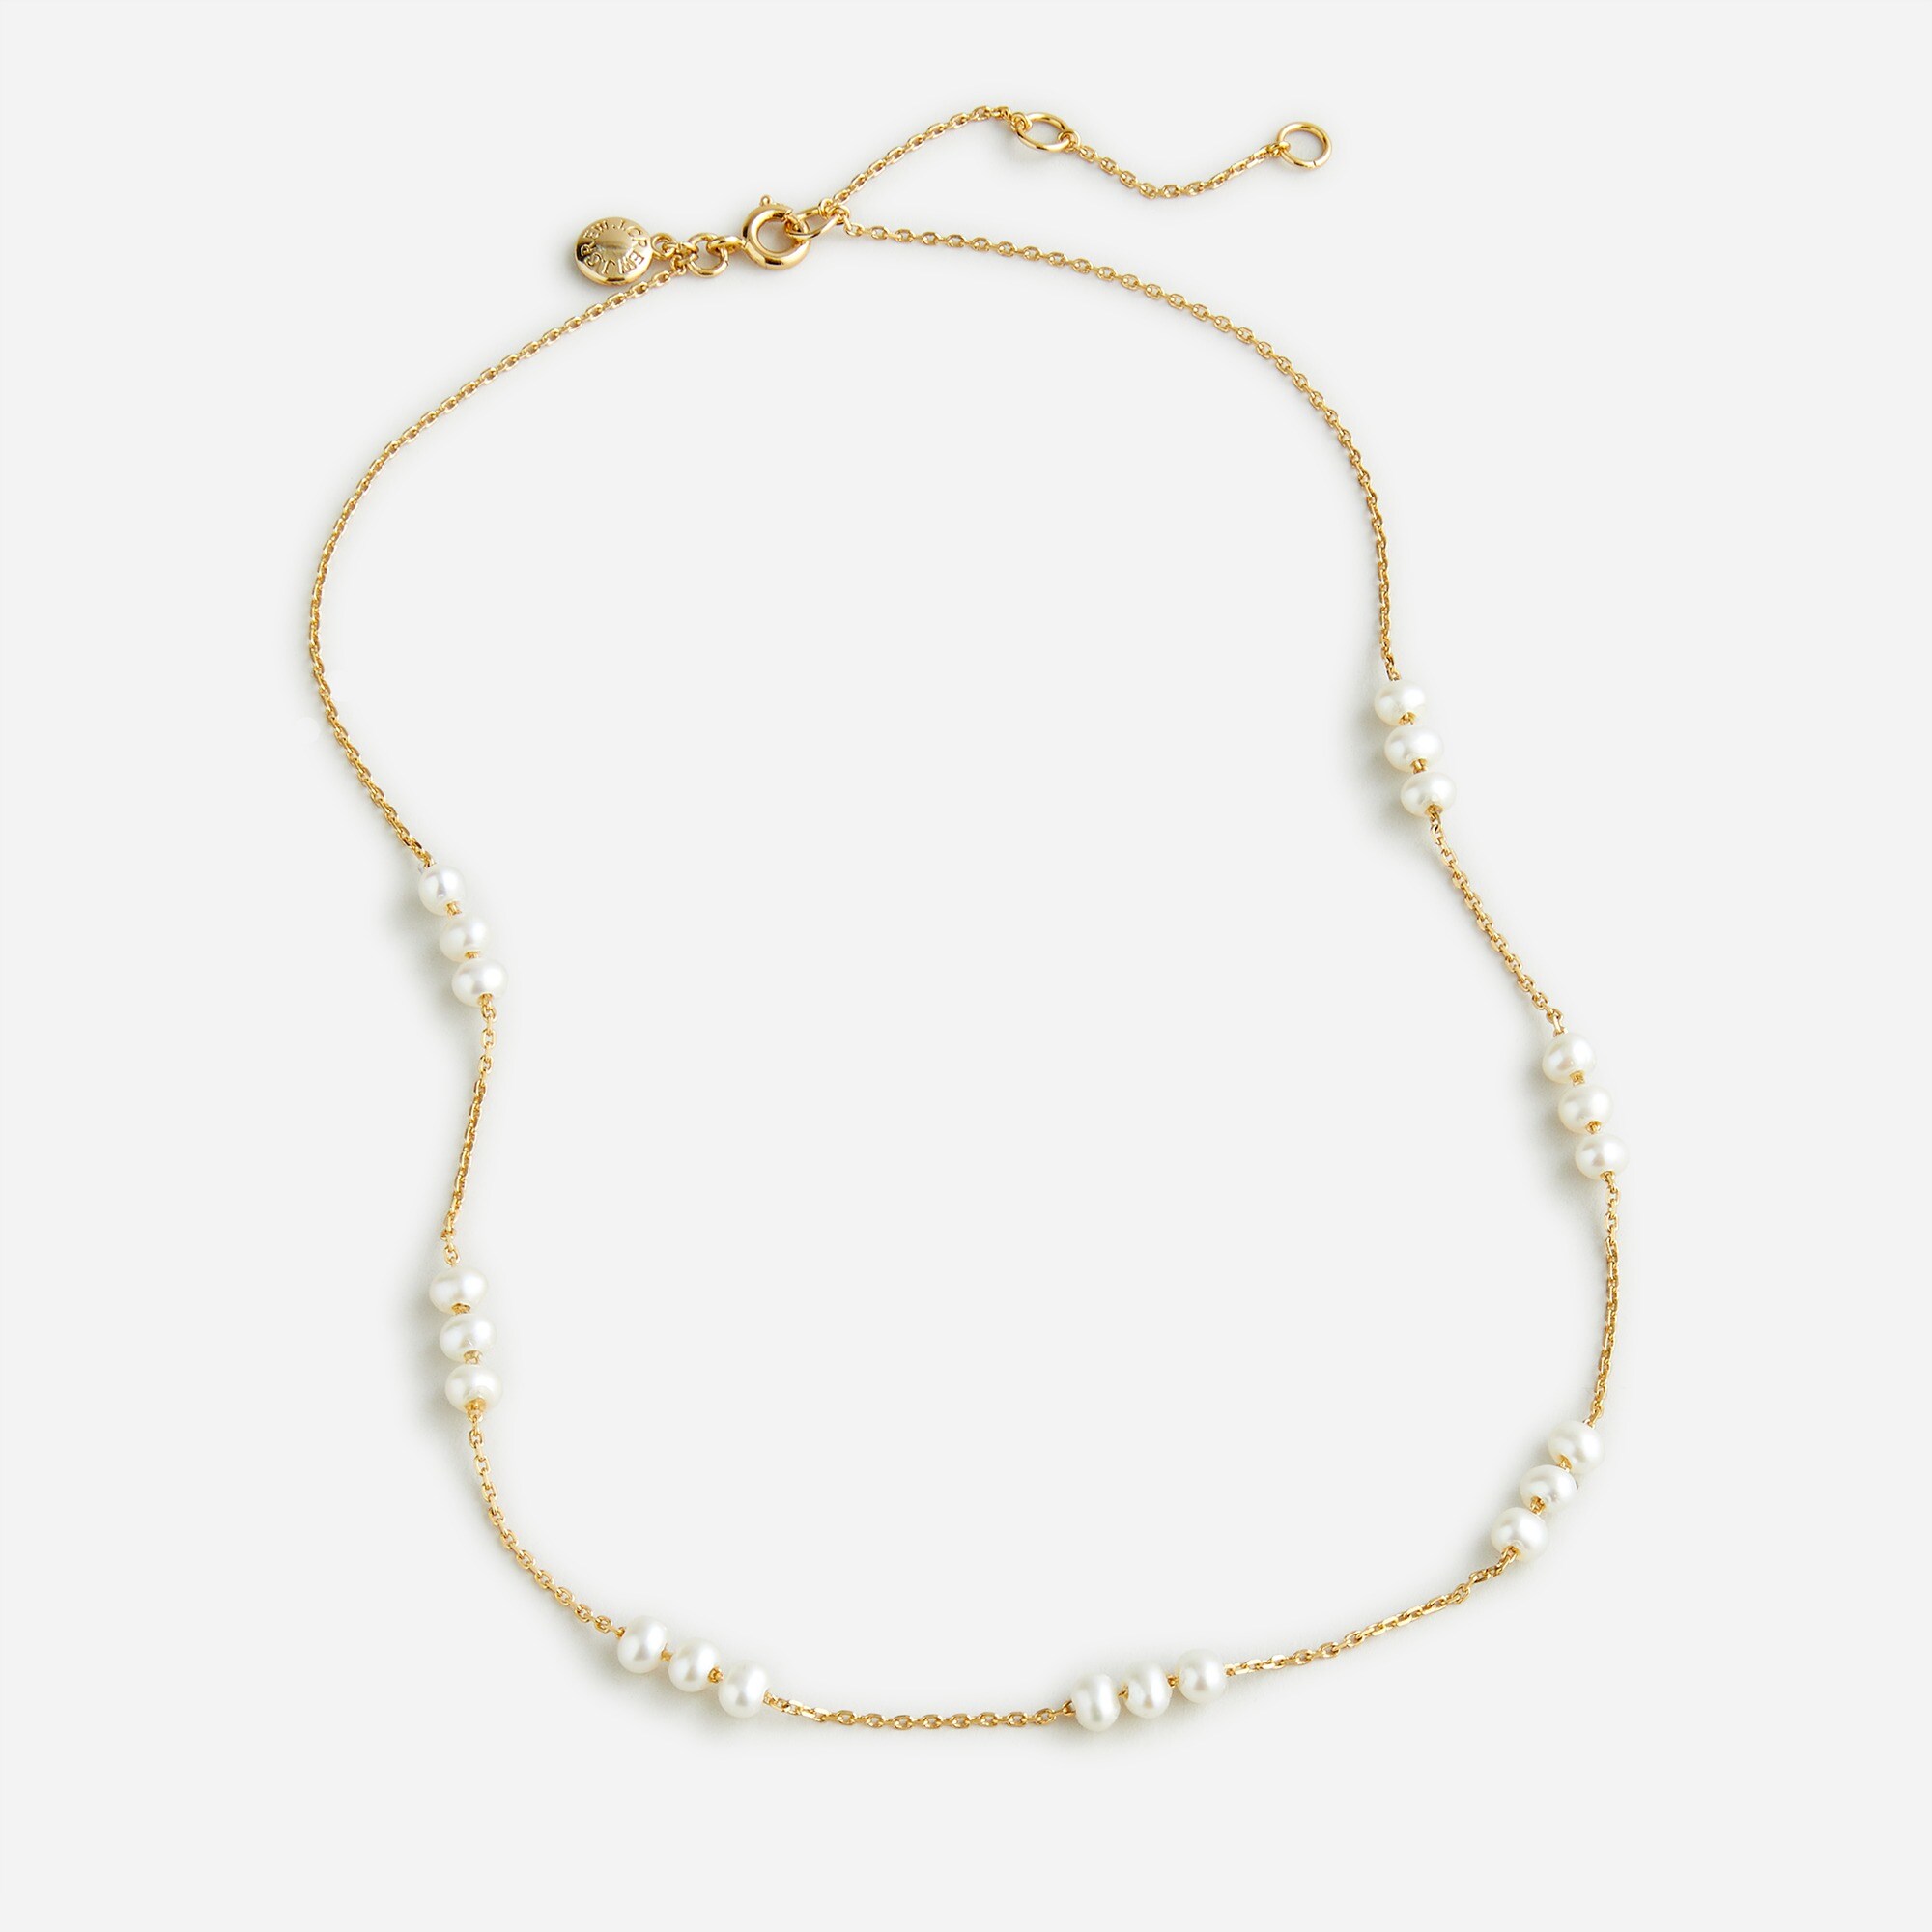  Freshwater pearl beaded necklace